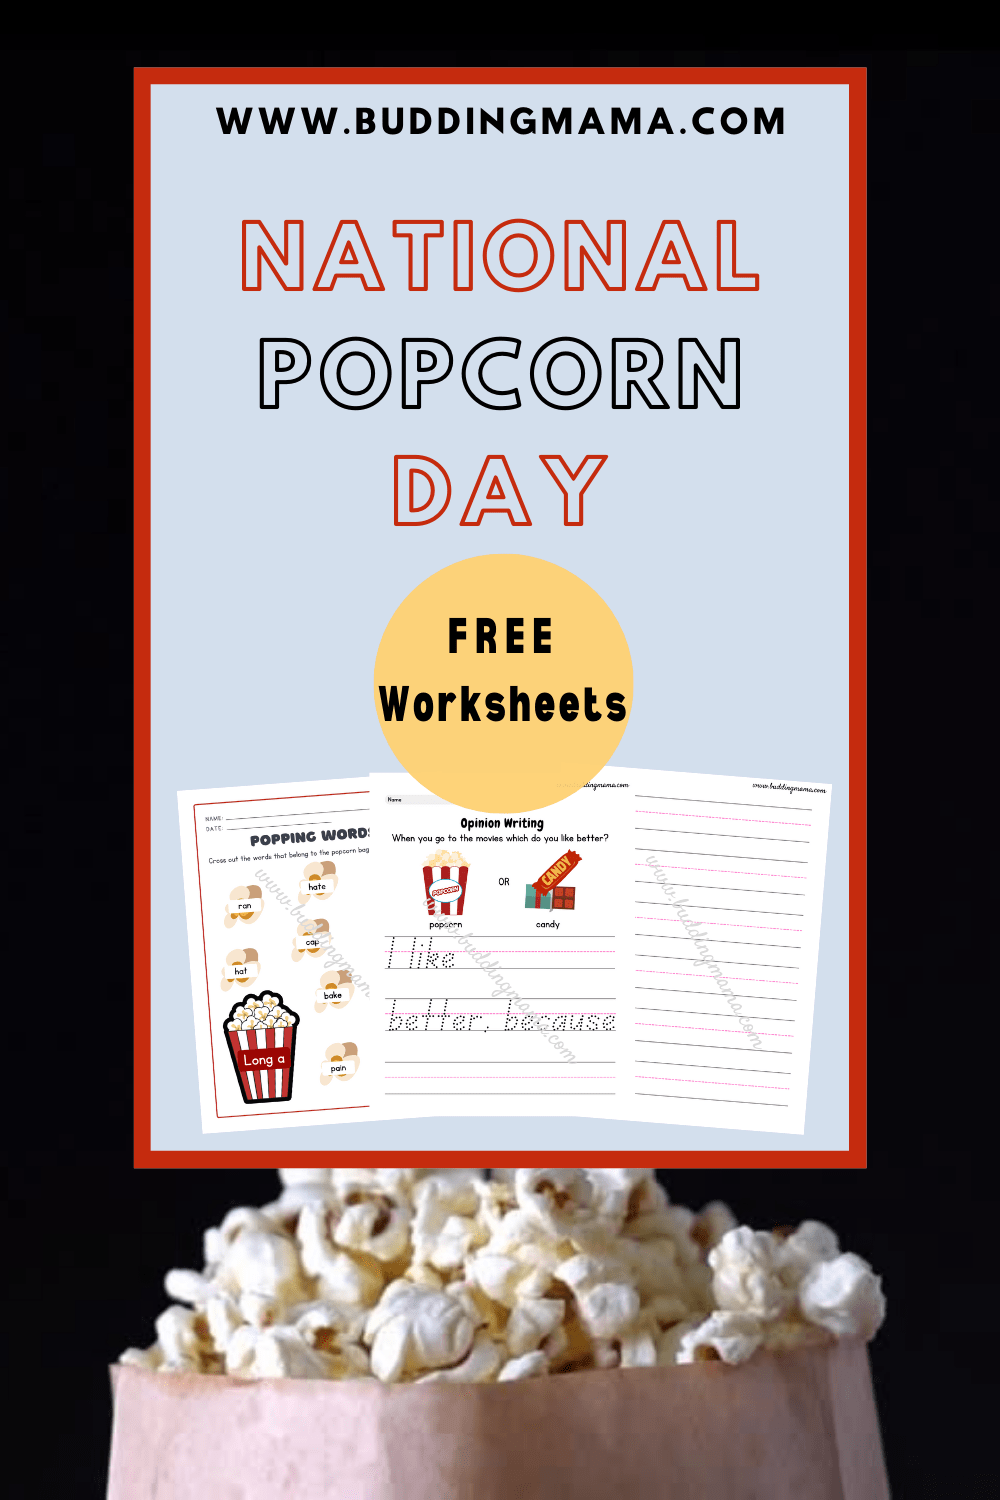 National Popcorn Day worksheets with vowel practice for Kinder and 1st grade Budding Mama